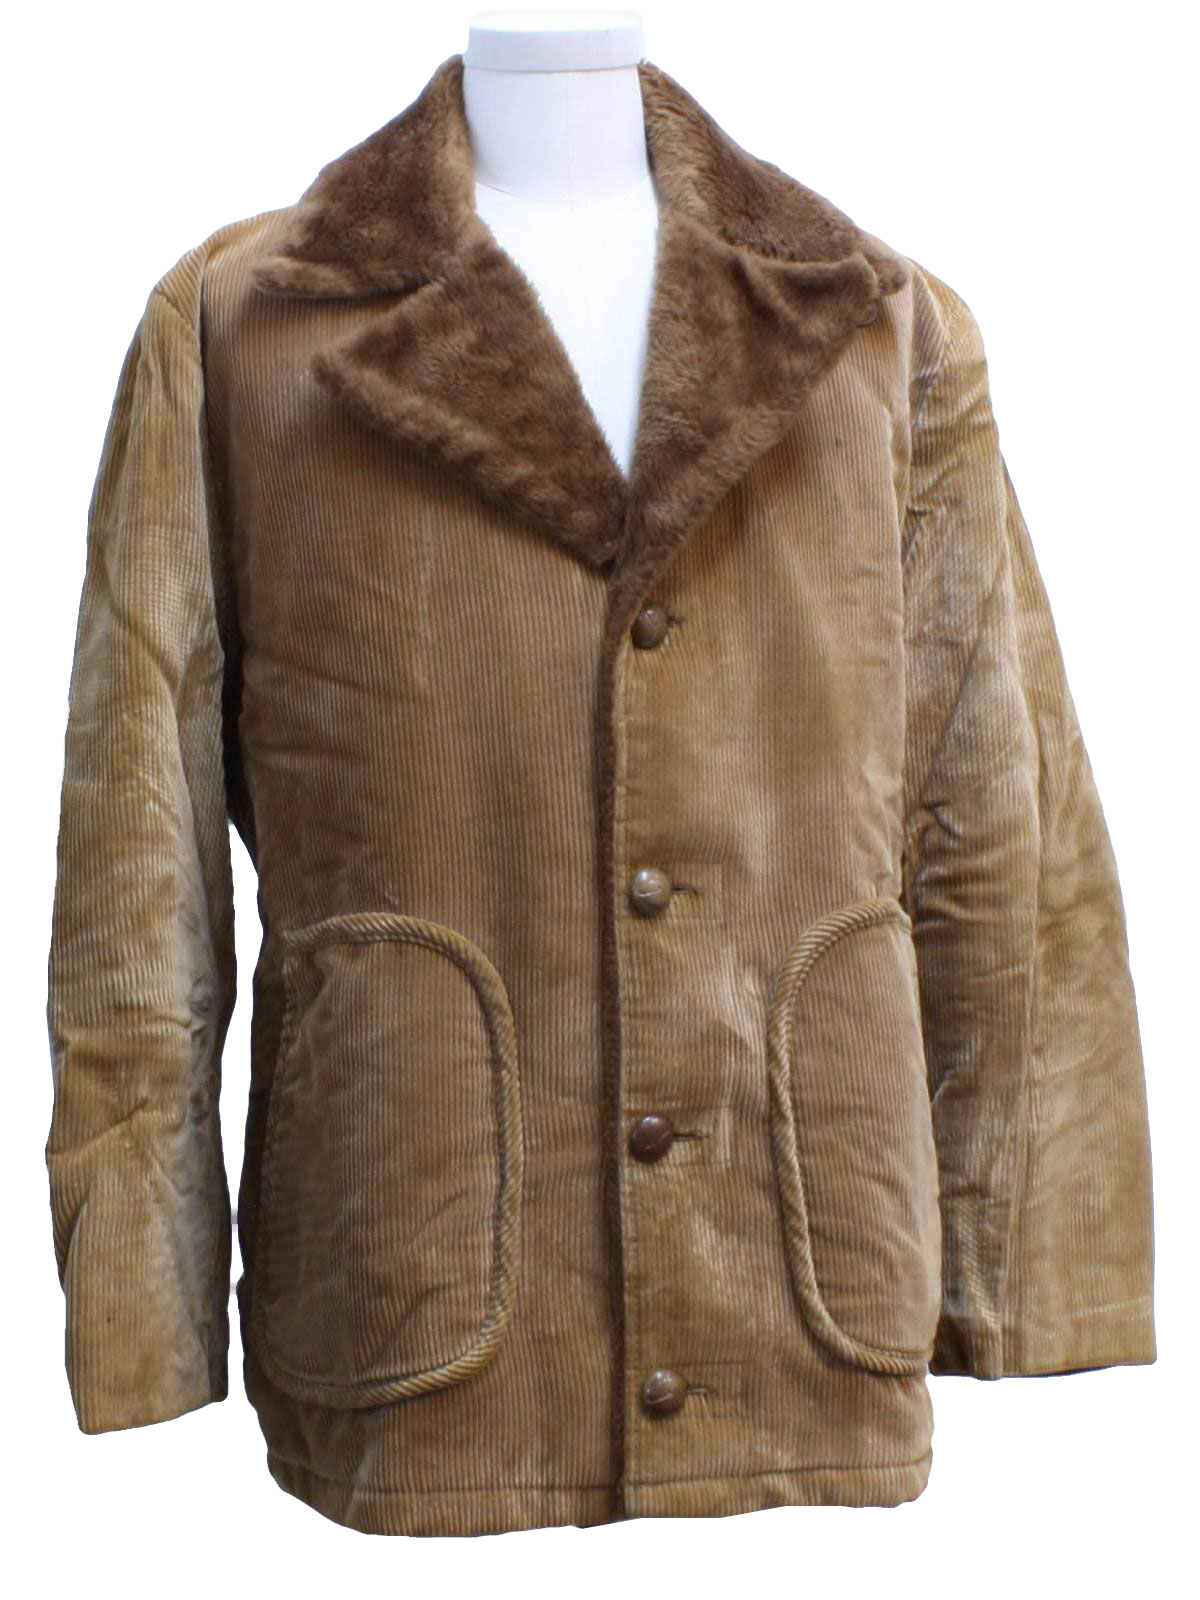 Vintage VIP 70's Jacket: 70s -VIP- Mens tan and brown cotton blend ...